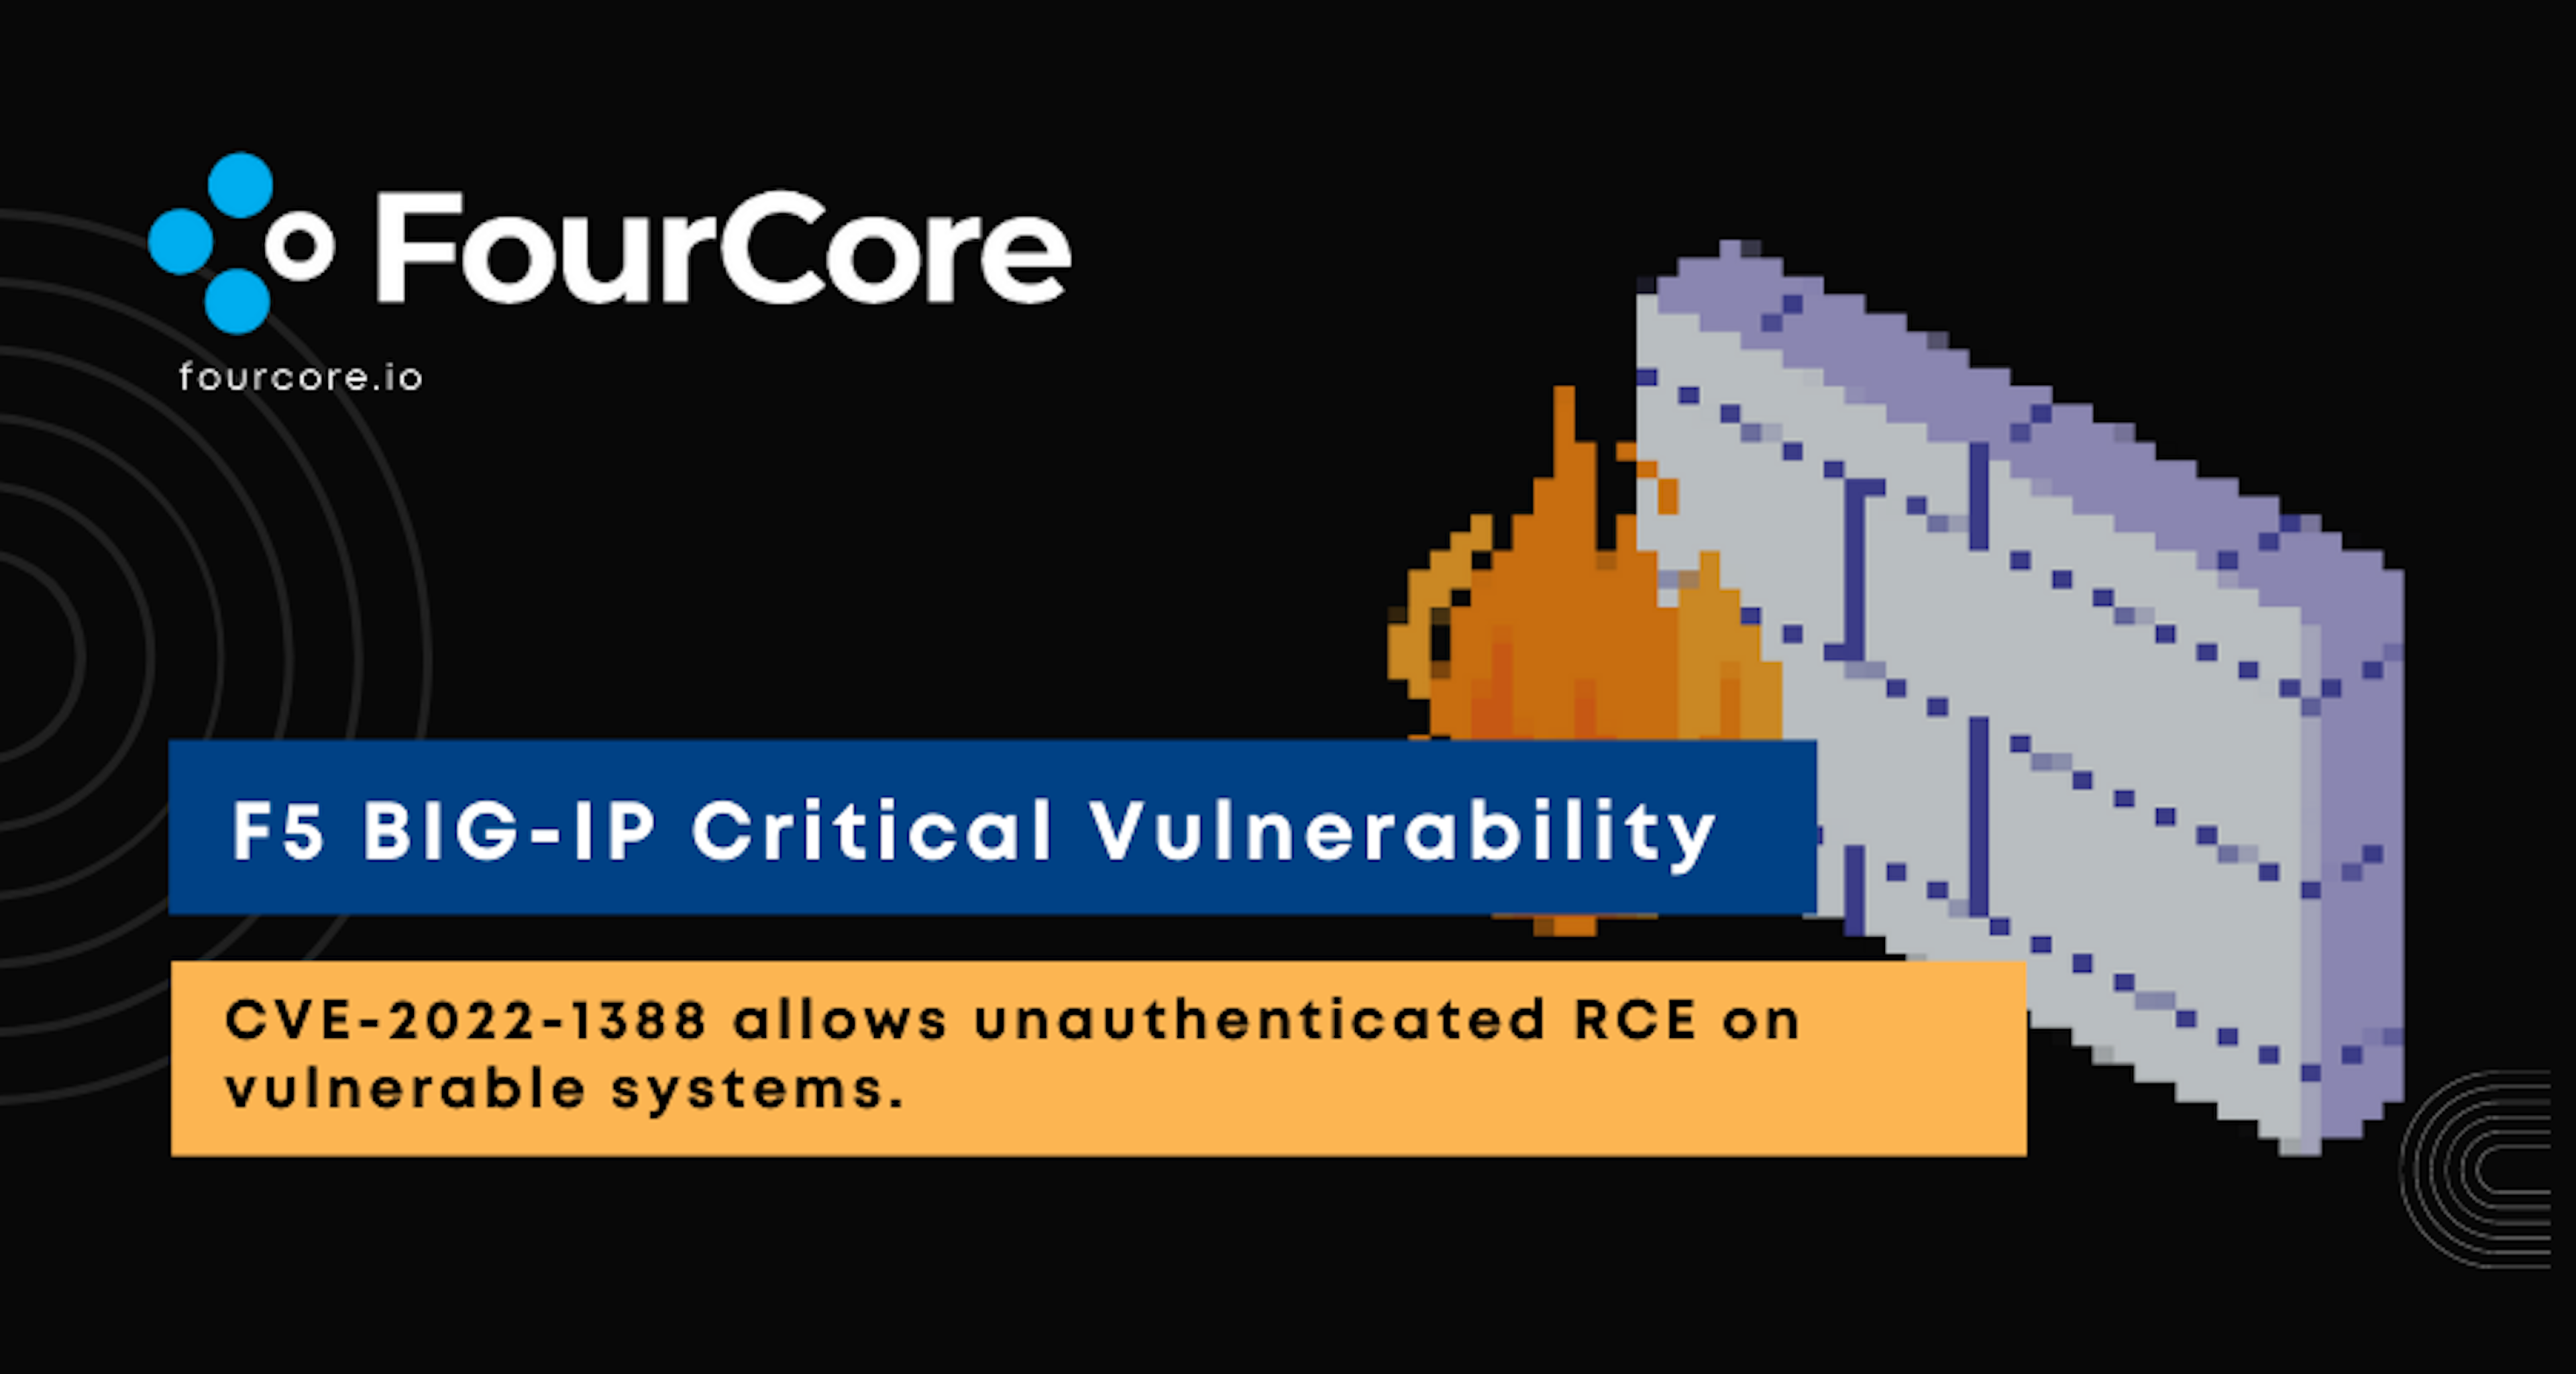 F5 BIG-IP critical vulnerability exploited by attackers to gain unauthenticated RCE Blog Post Image